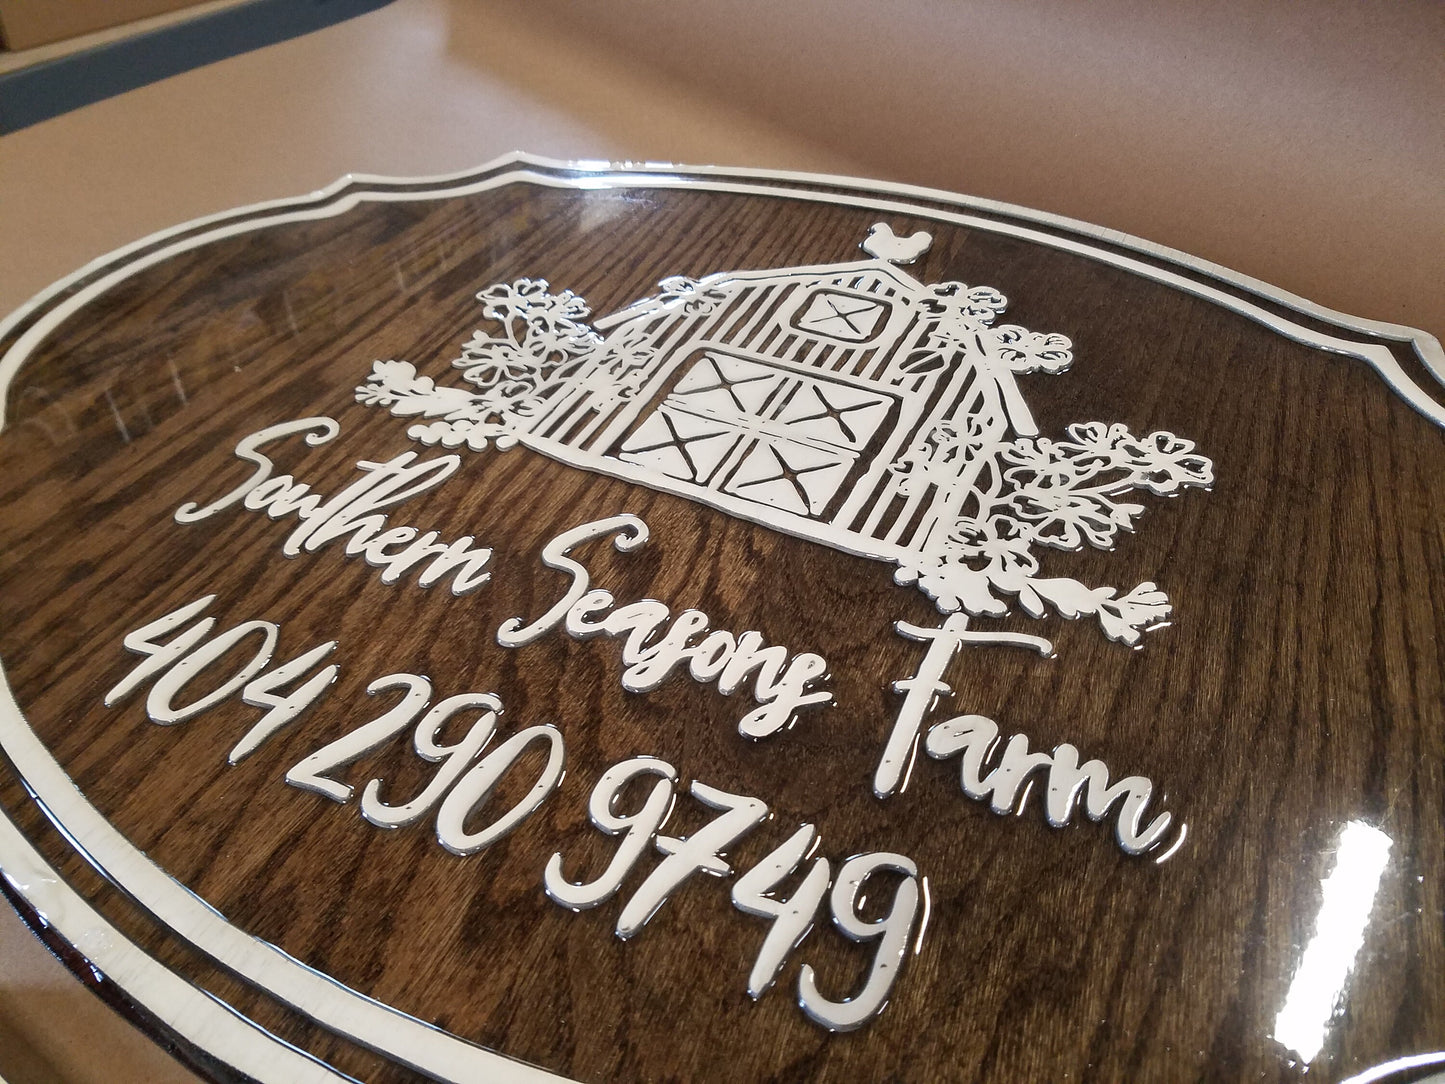 Farm Market Sign, Seasonal Store, Hanging Options, Eggs, Honey, Business Sign, Oval, Raised Text, Custom, Small Business Laser Cut, Wood